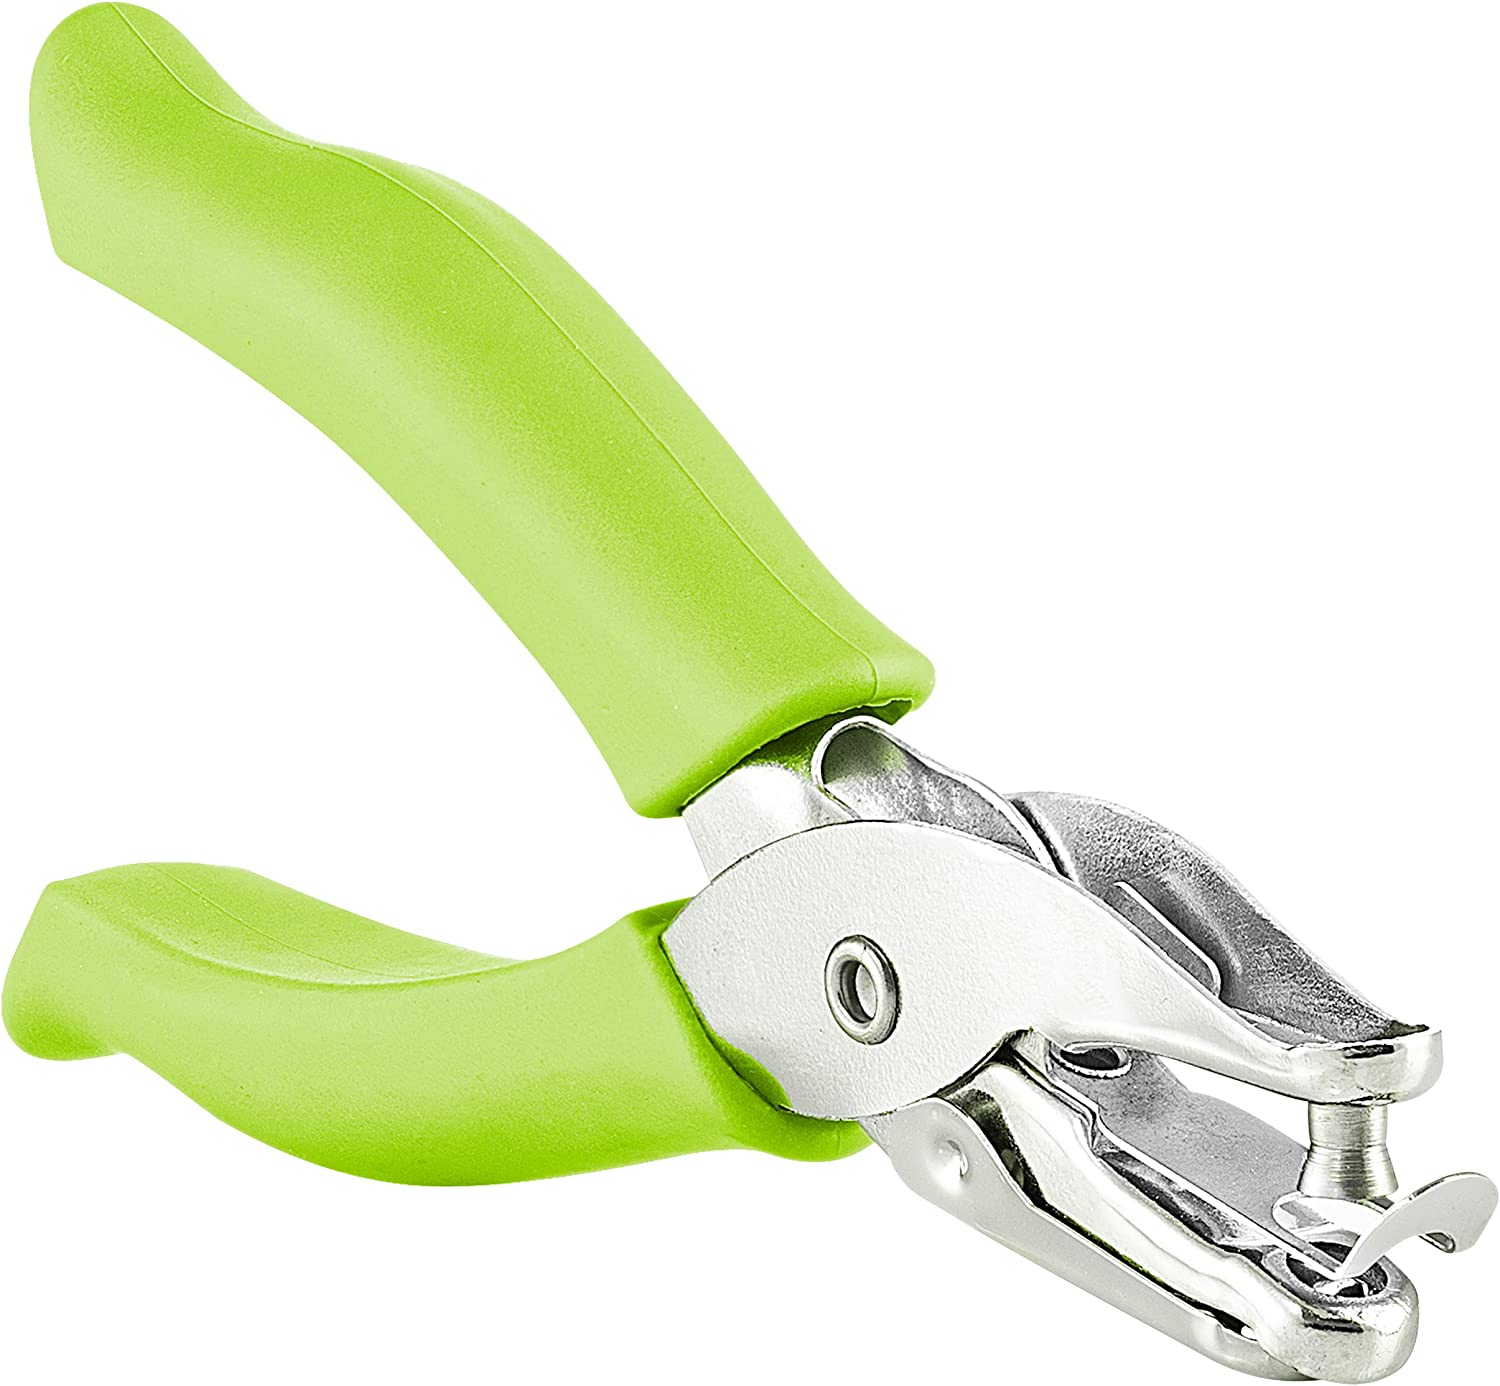 Enday Portable 3-Hole Paper Punch, Green